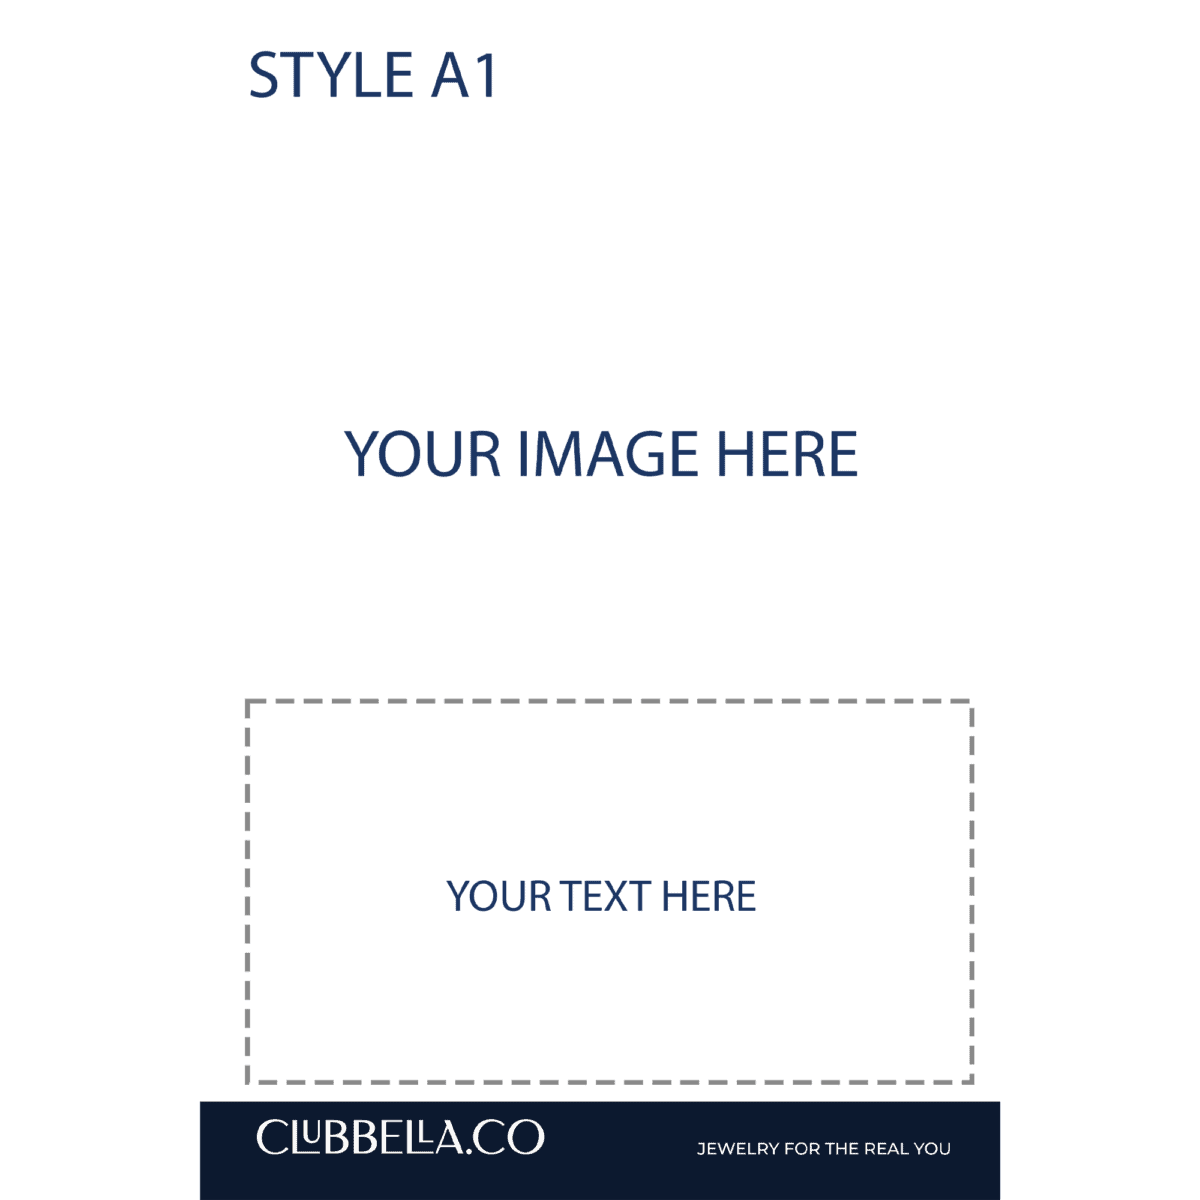 https://m.clubbella.co/product/personalized-greeting-cards-a1/ Greeting card style TEMPLATE A1-1